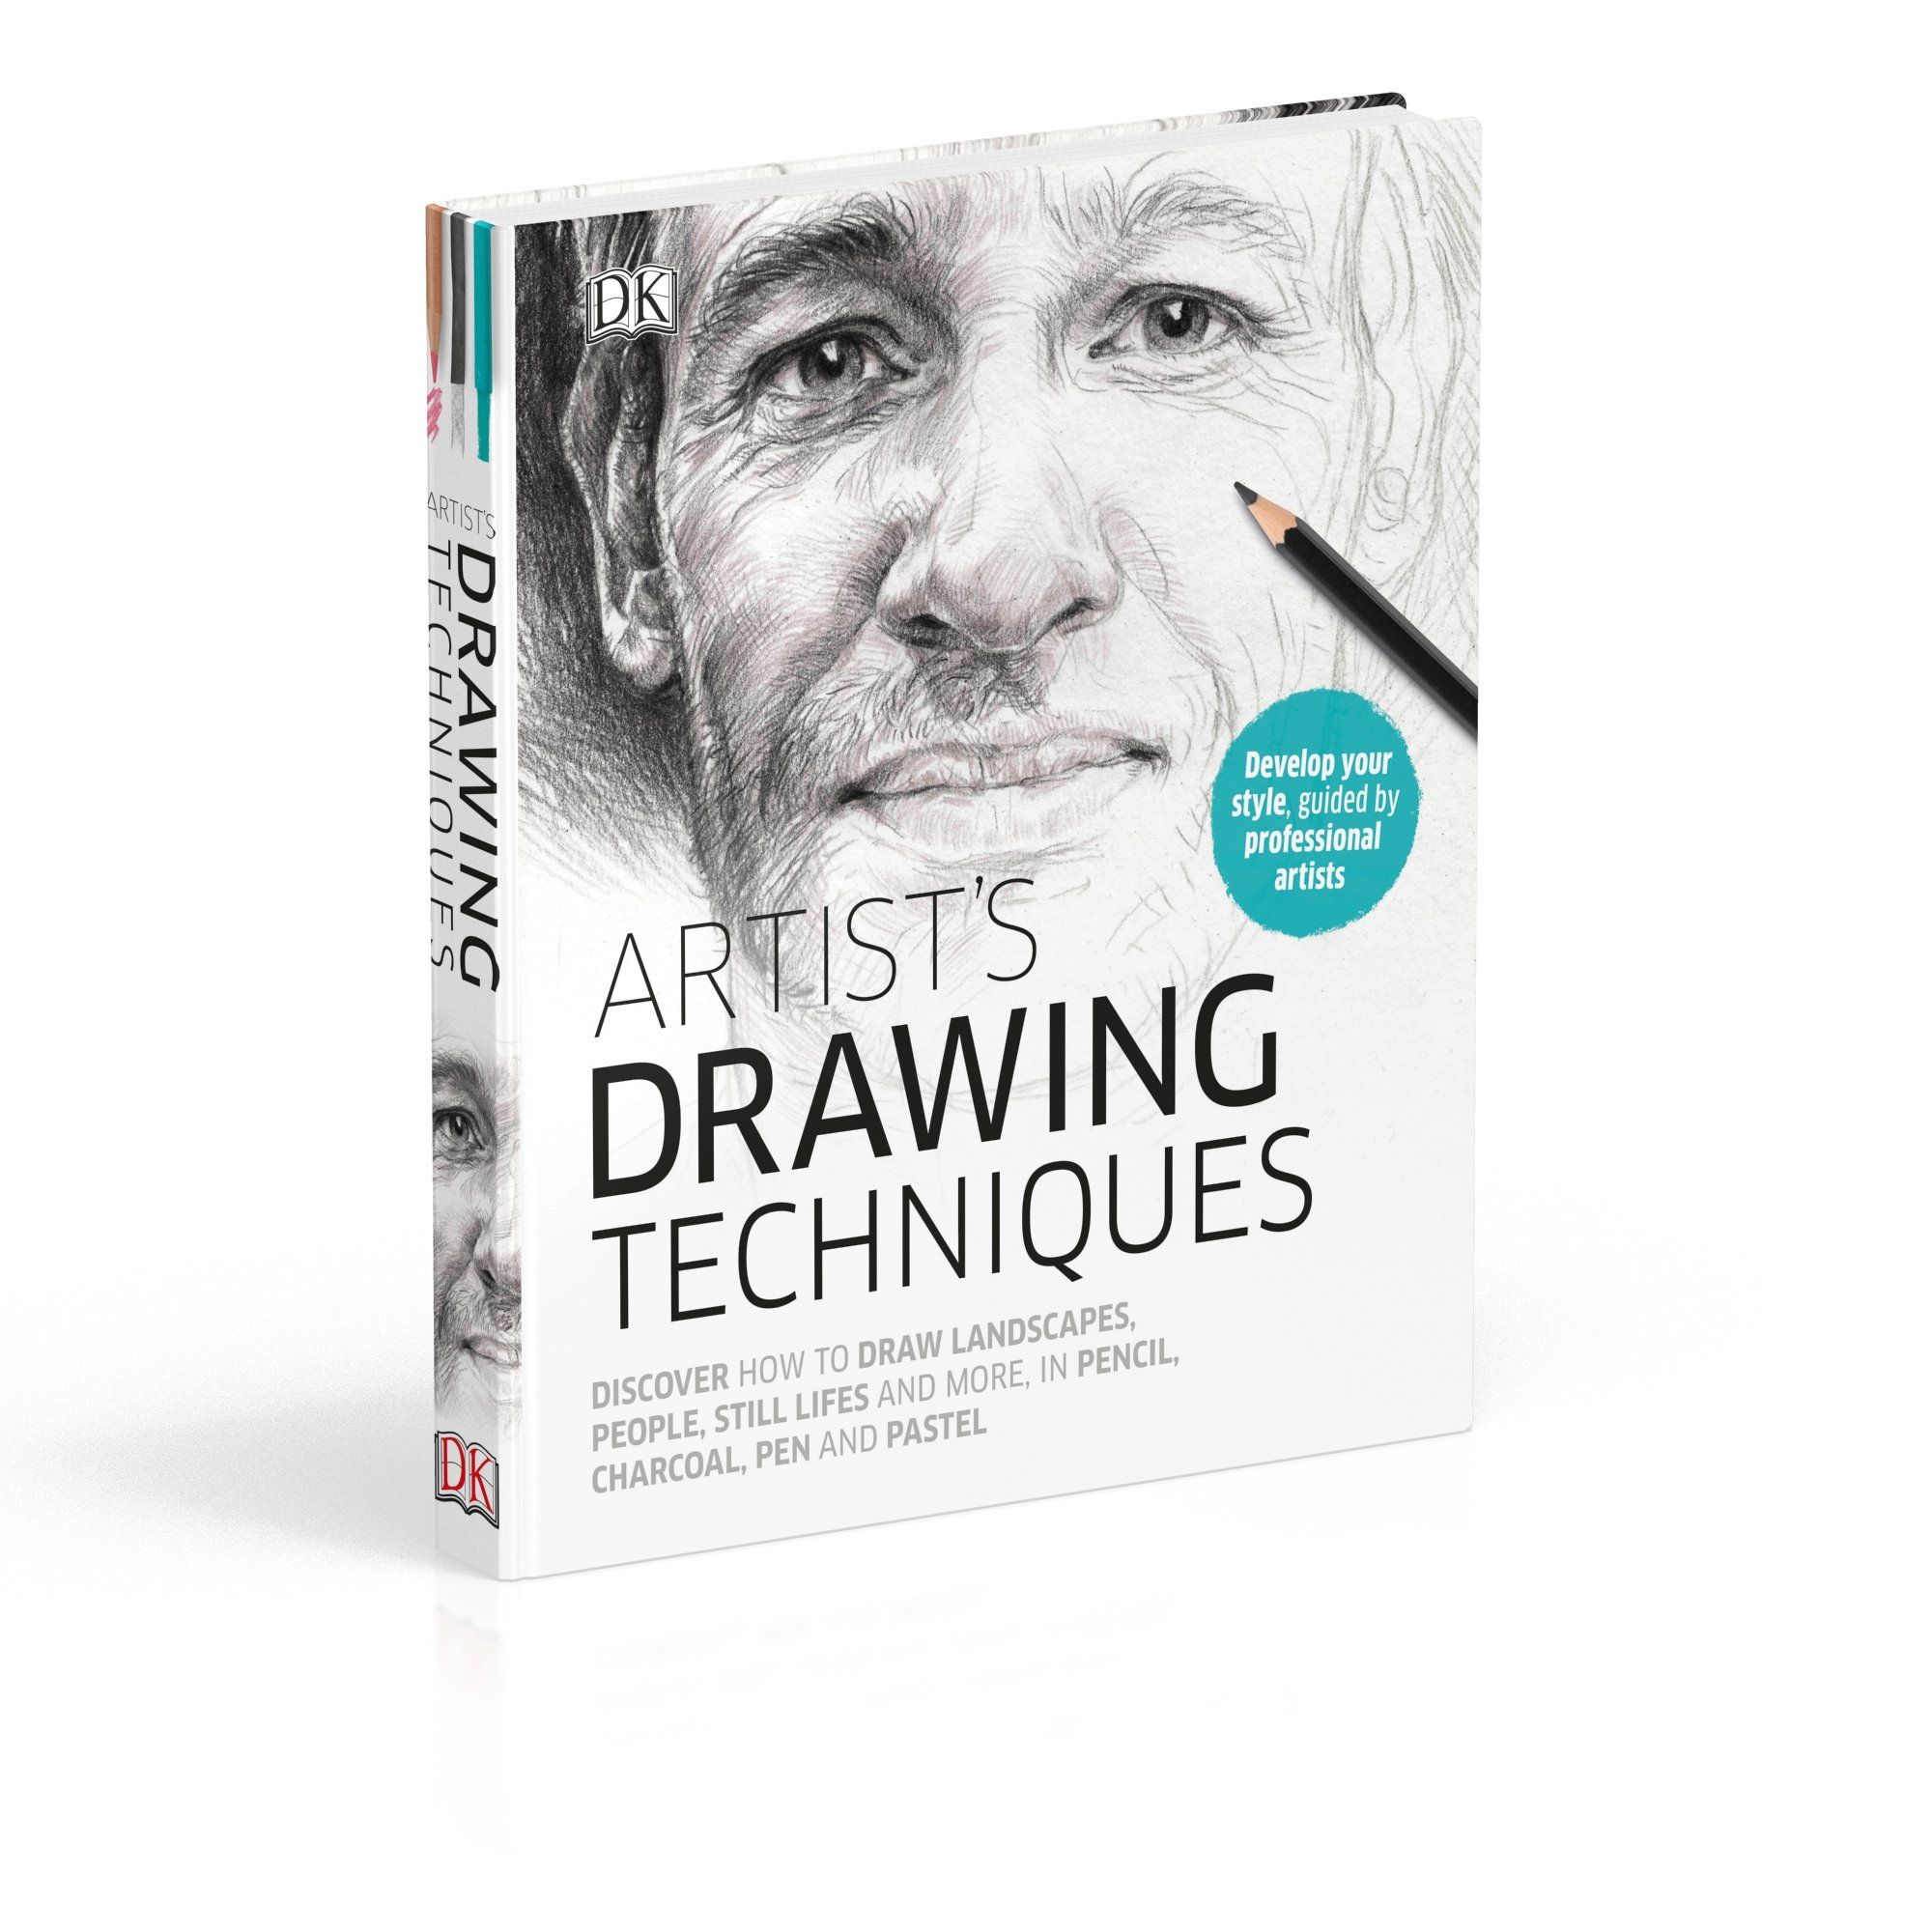  Artist's Drawing Techniques : Discover How to Draw Landscapes, People, Still Lifes and More, in Pencil, Charcoal, Pen and Pastel_DK_9780241255988_Dorling Kindersley Ltd 